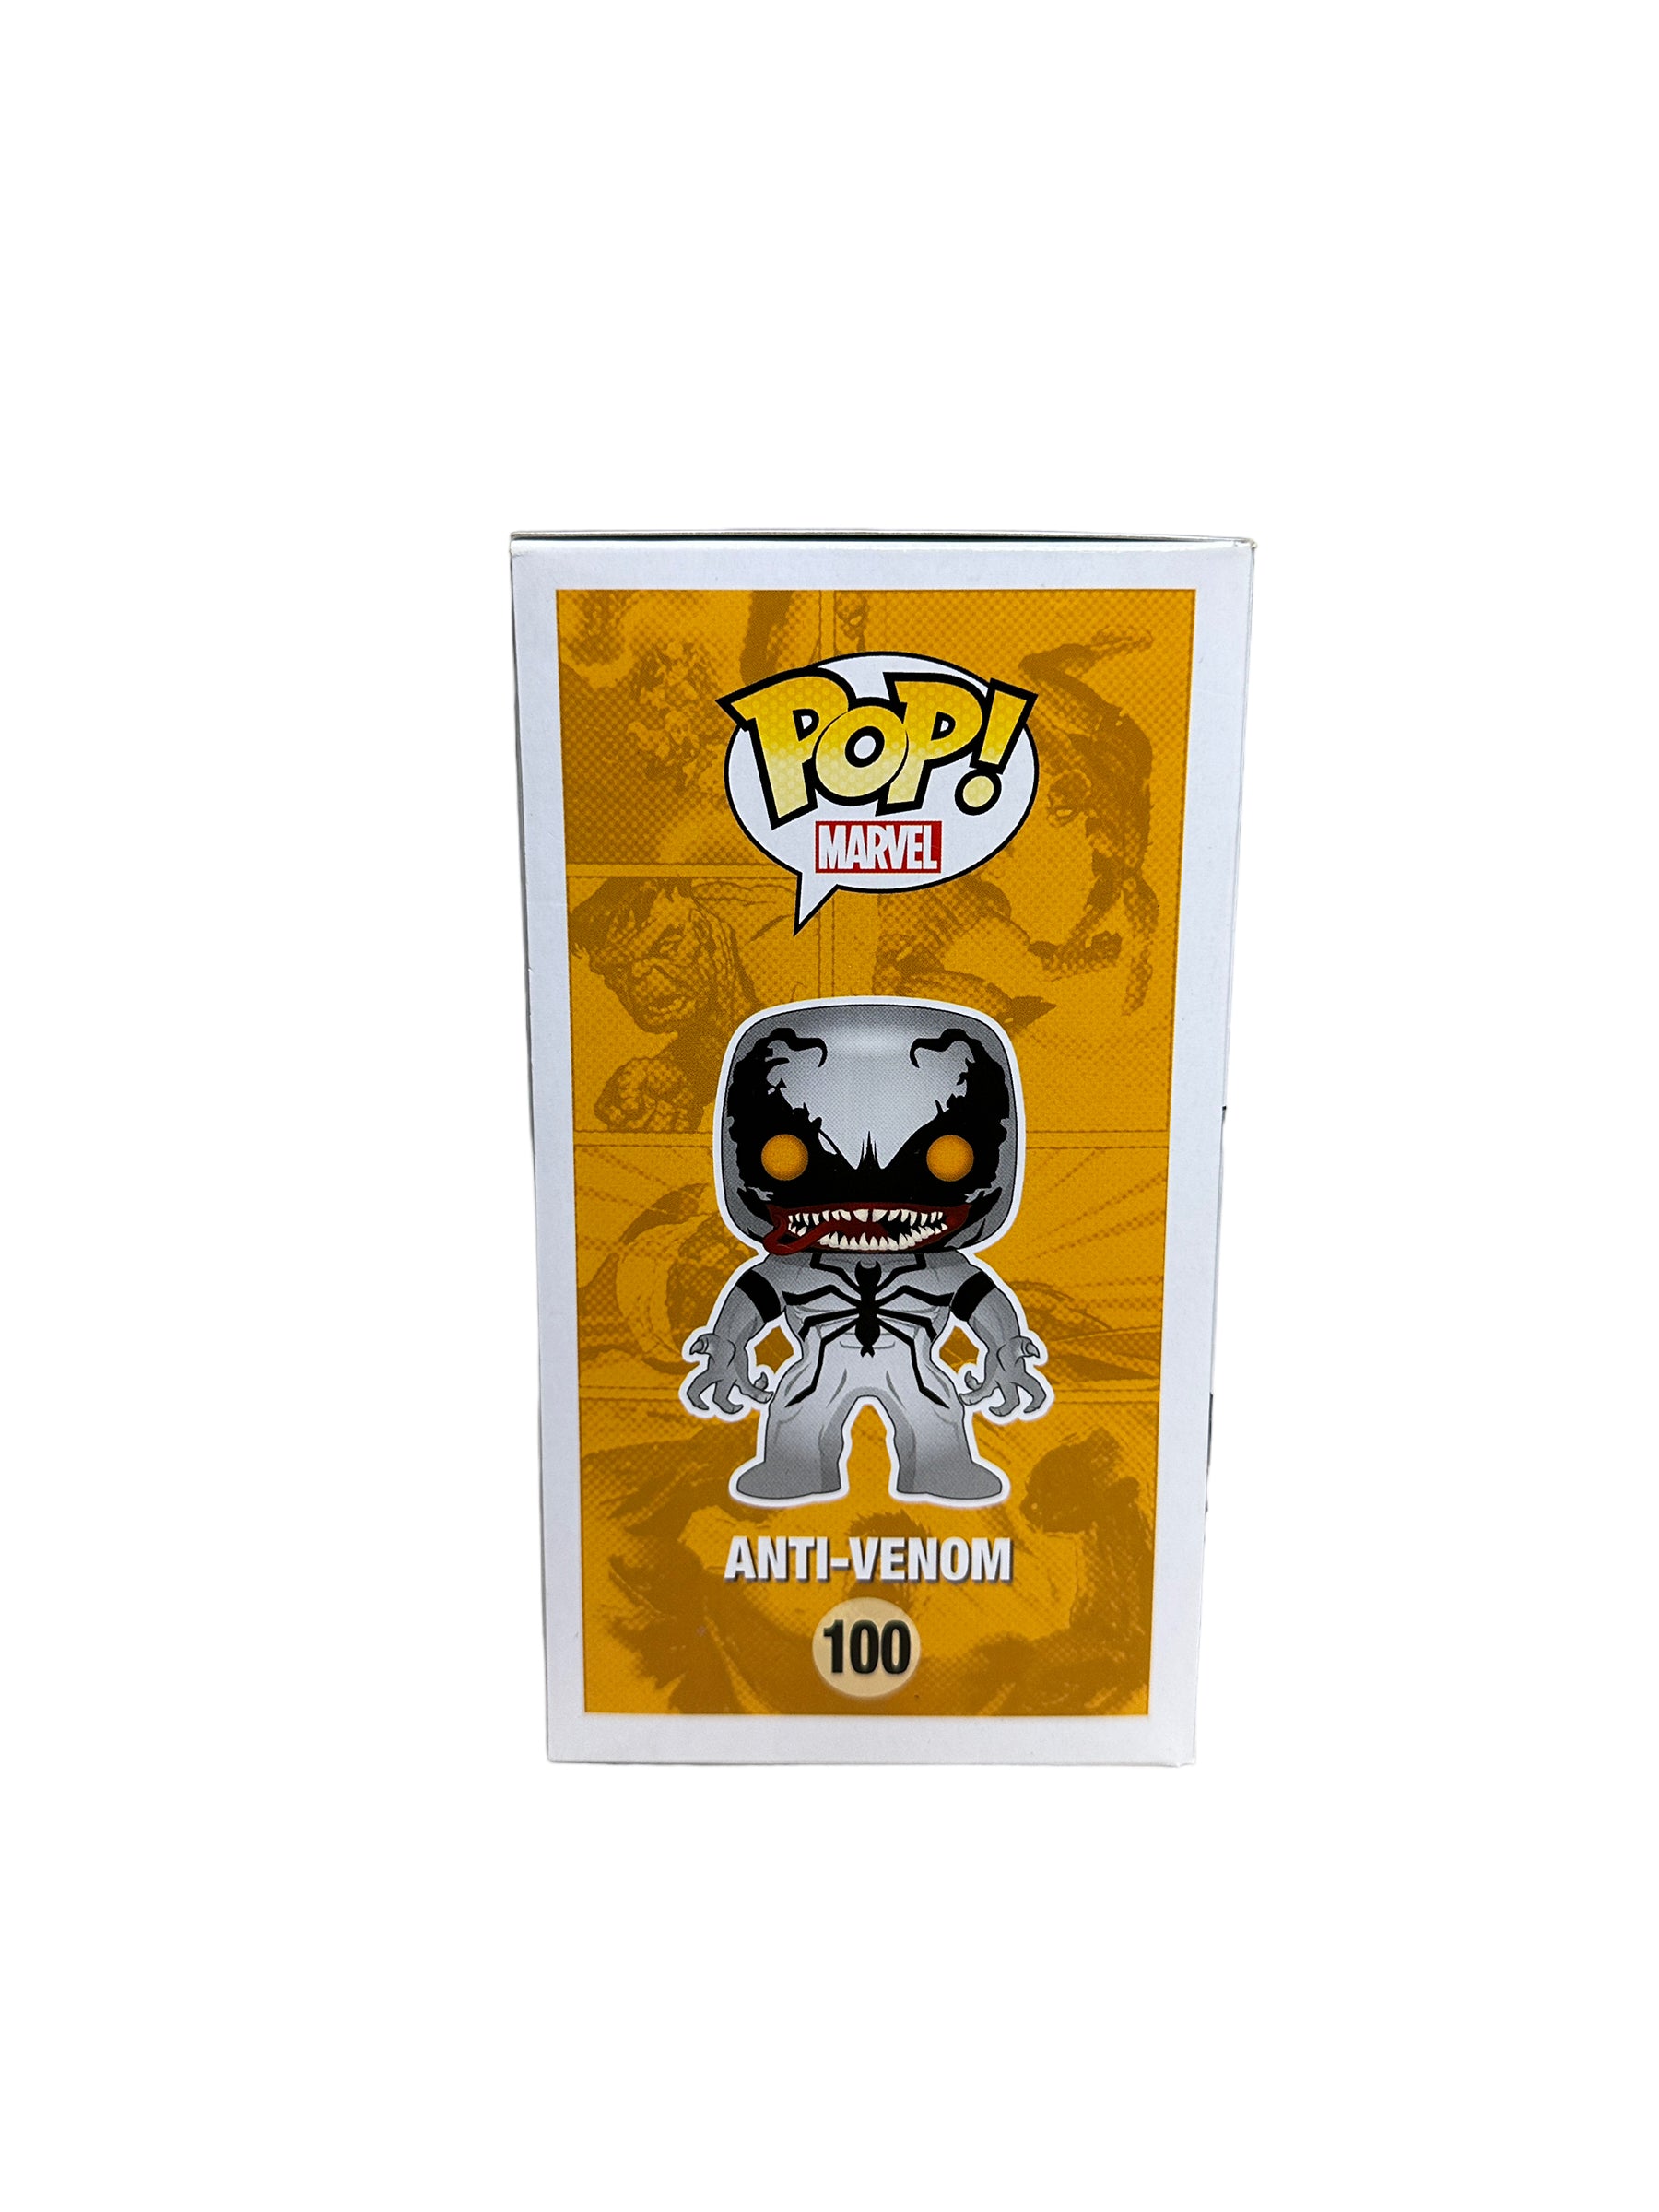 Stan Lee Signed Anti-Venom #100 Funko Pop! - Marvel - Hot Topic Exclusive - Condition 9.5/10 - Excelsior Approved